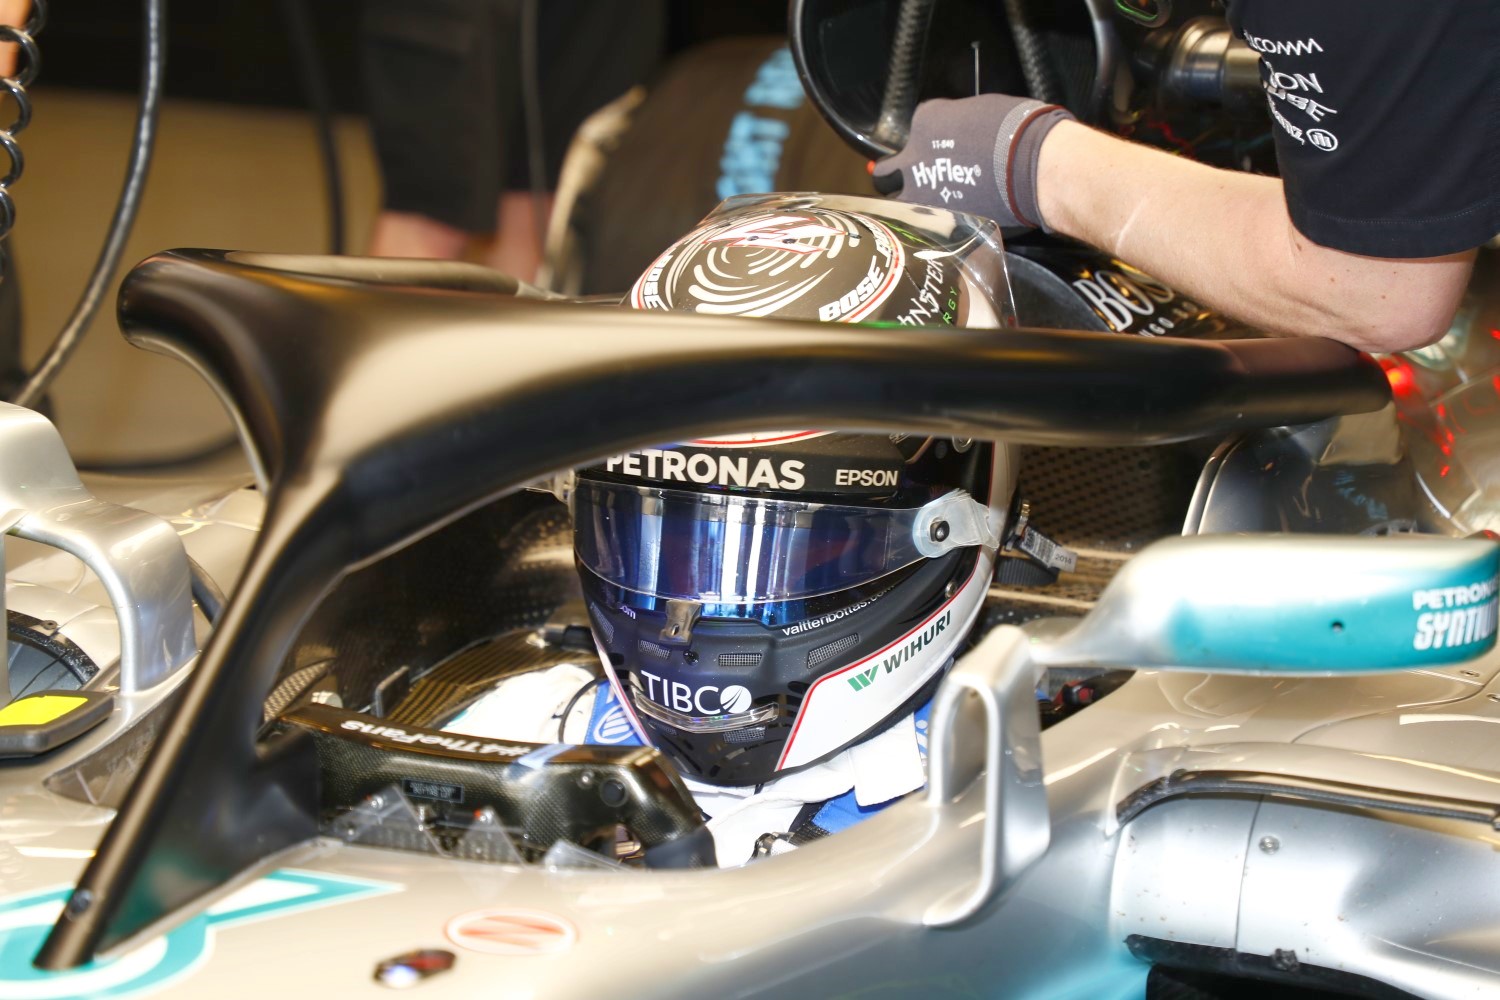 Mercedes ready to dominate F1 again